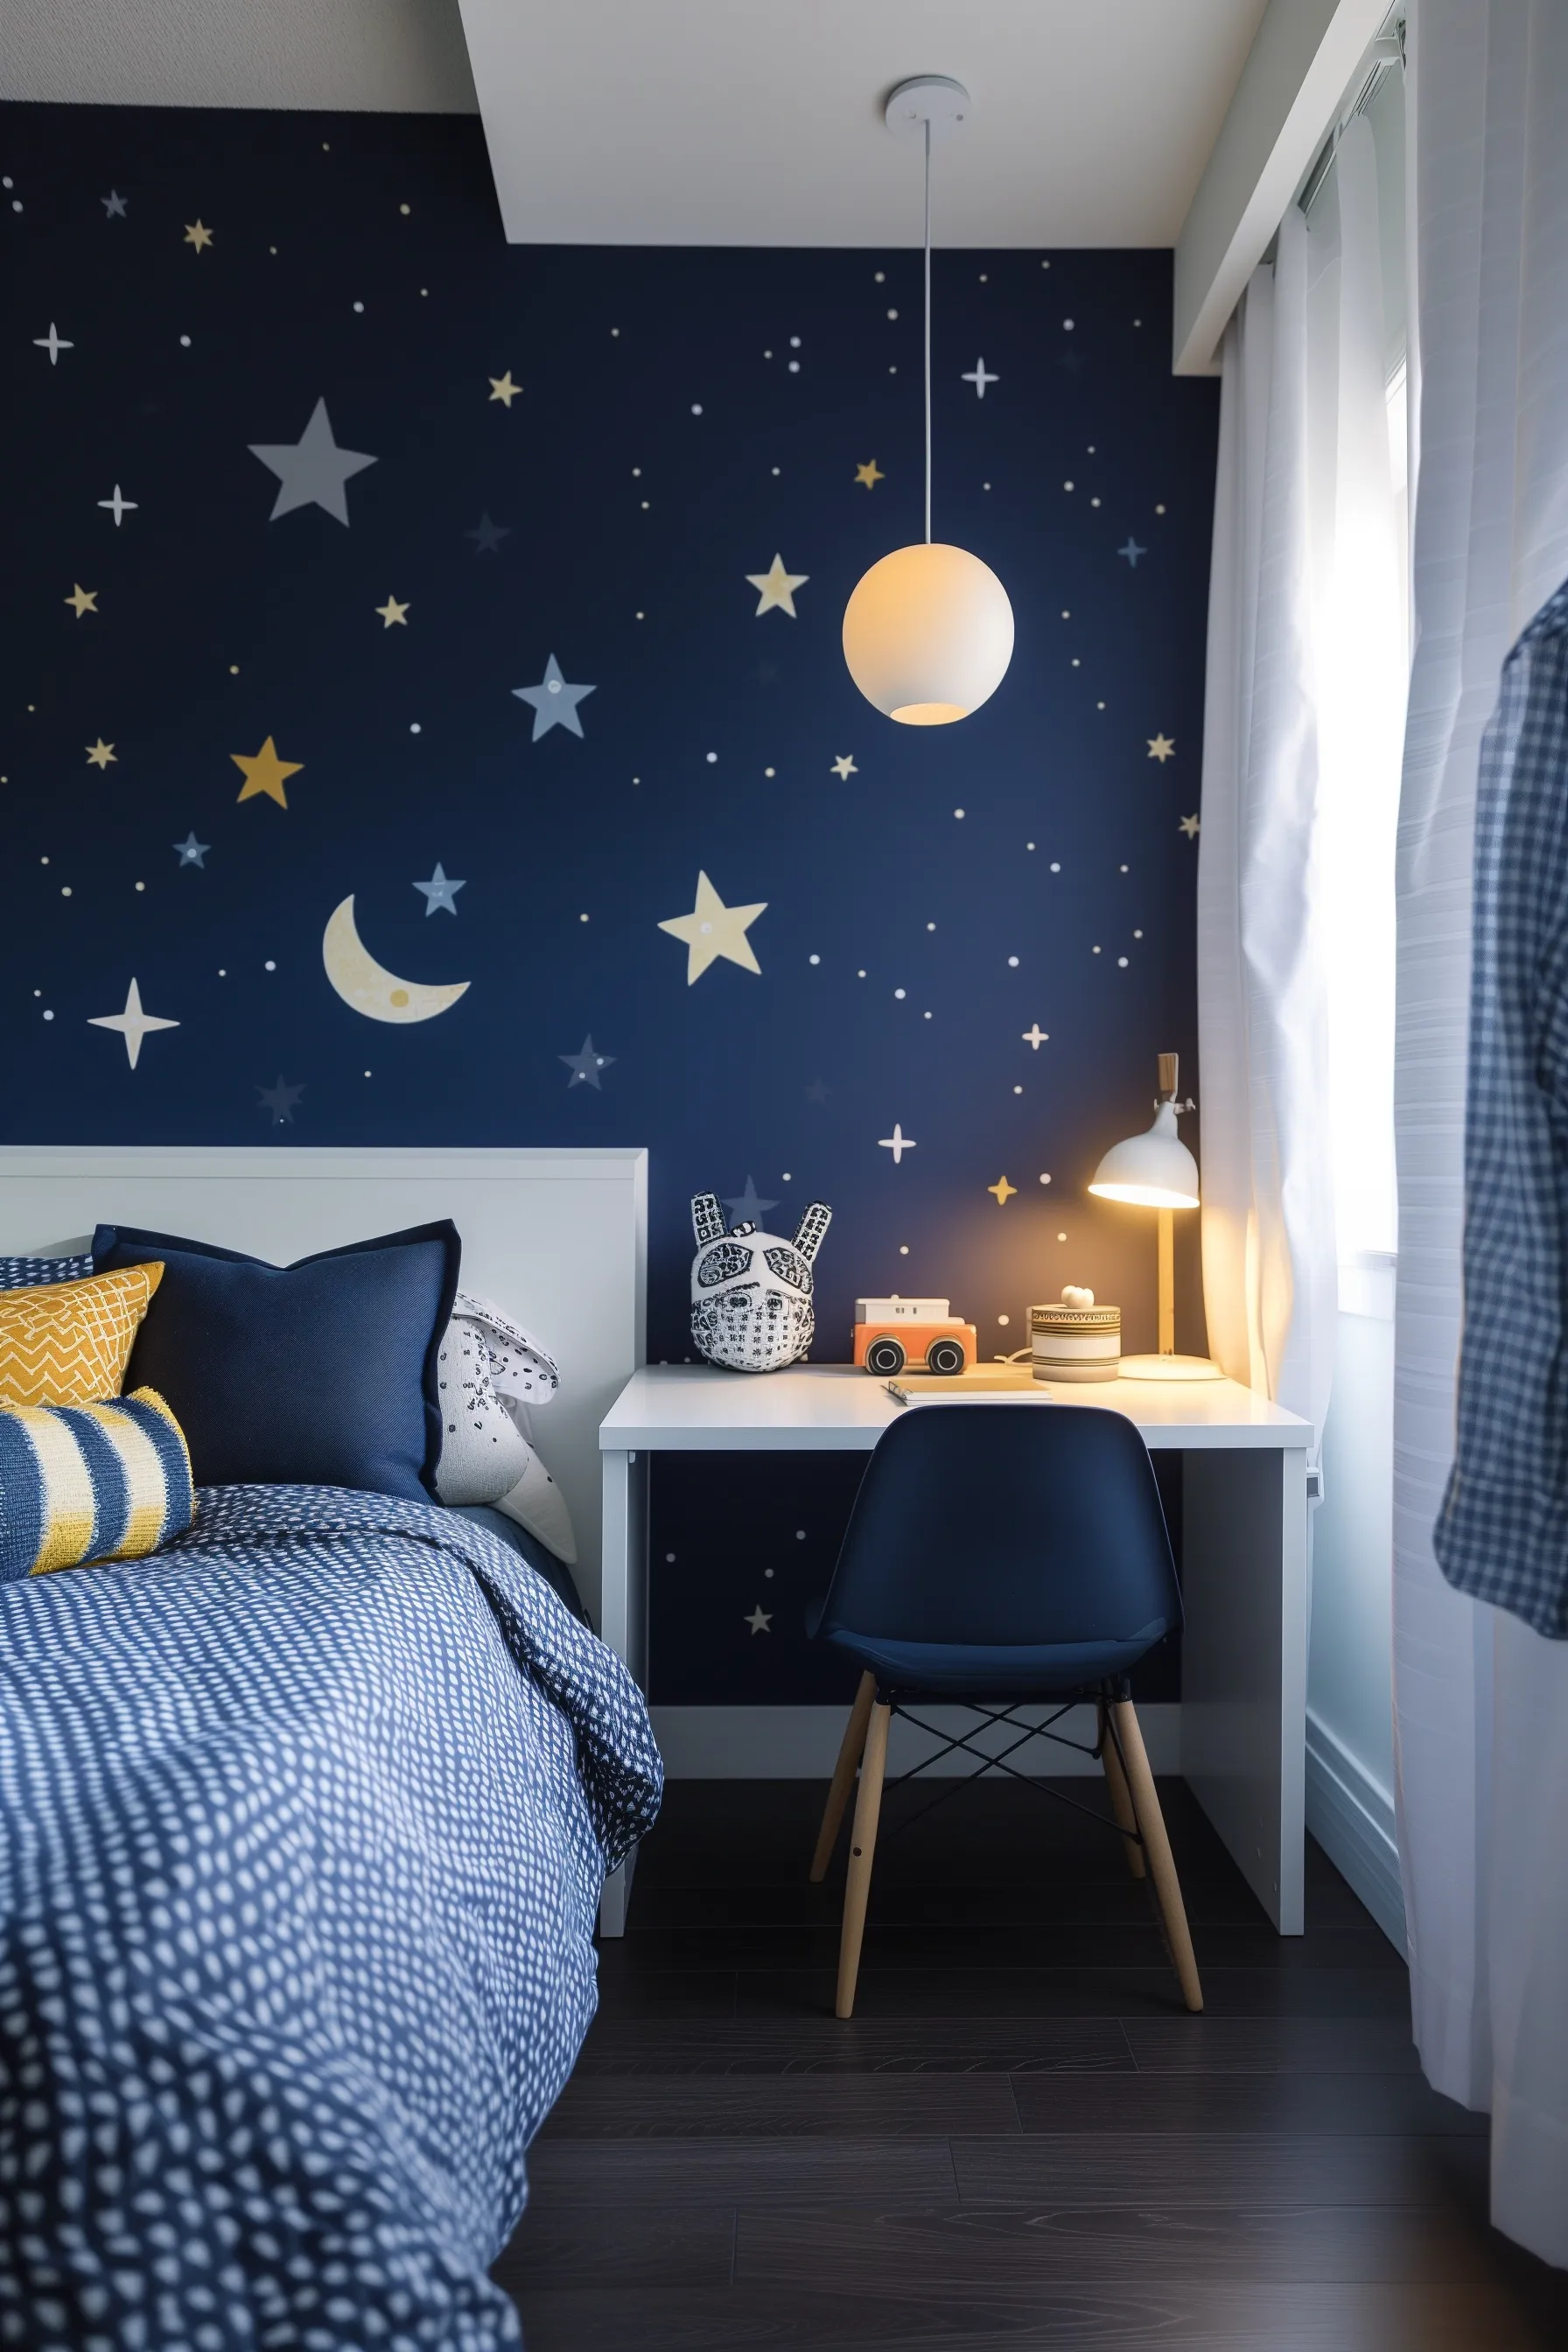  the bedroom features colourful star wall murals and dark furniture, with a white desk in the corner, in the style of dark navy and light indigo, whimsical sci-fi, vancouver school, dark white and light white, multi-layered